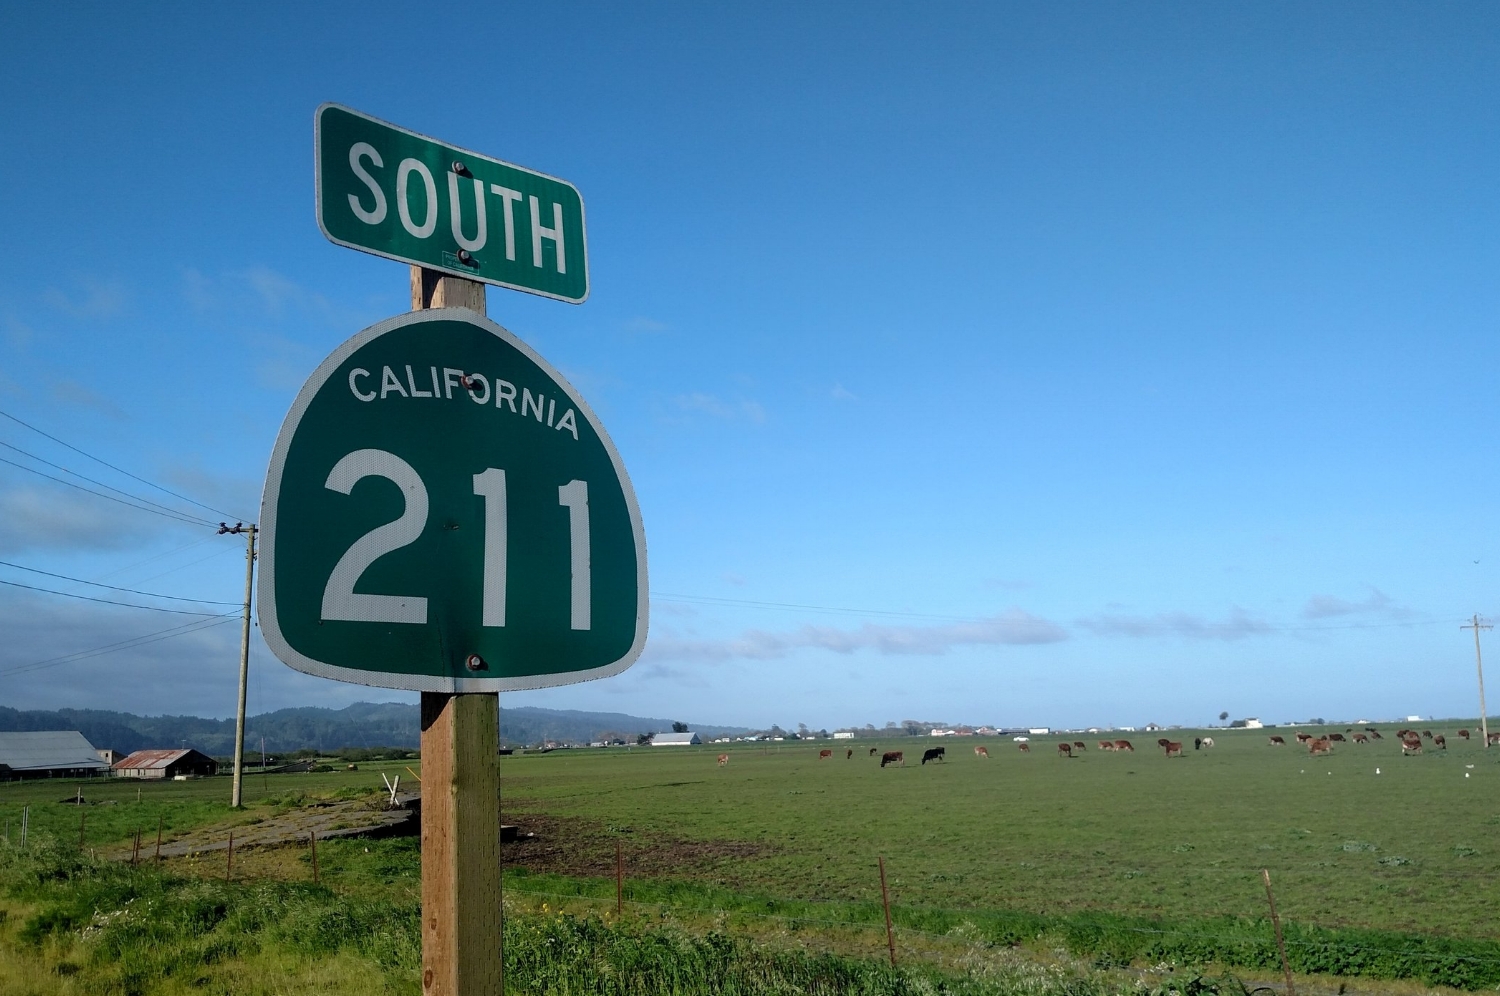 Highway 211 to Ferndale CA